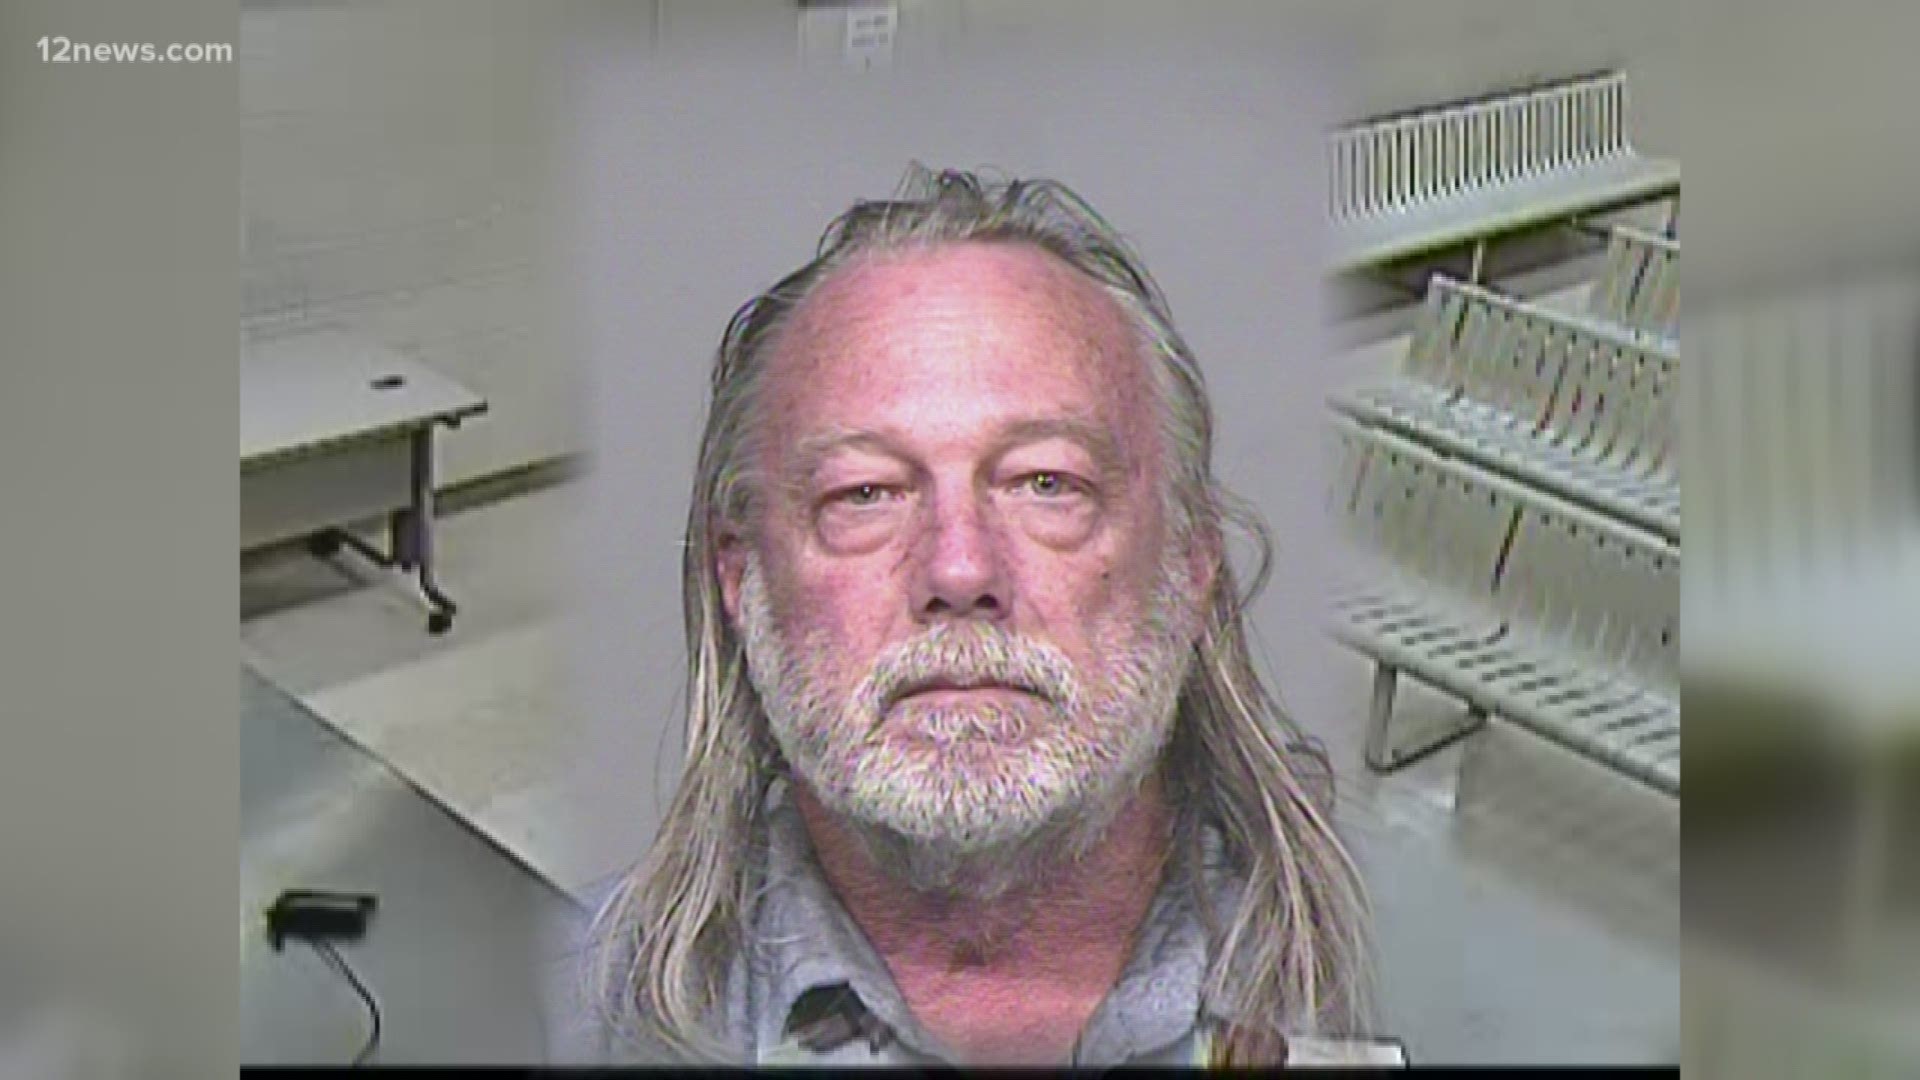 57-year-old Mitchell Mielke has been charged with sexual assault and exploitation of a minor after investigators say he repeatedly raped a three-year-old girl he was taking care of. He allegedly took pictures of and filmed the assaults.